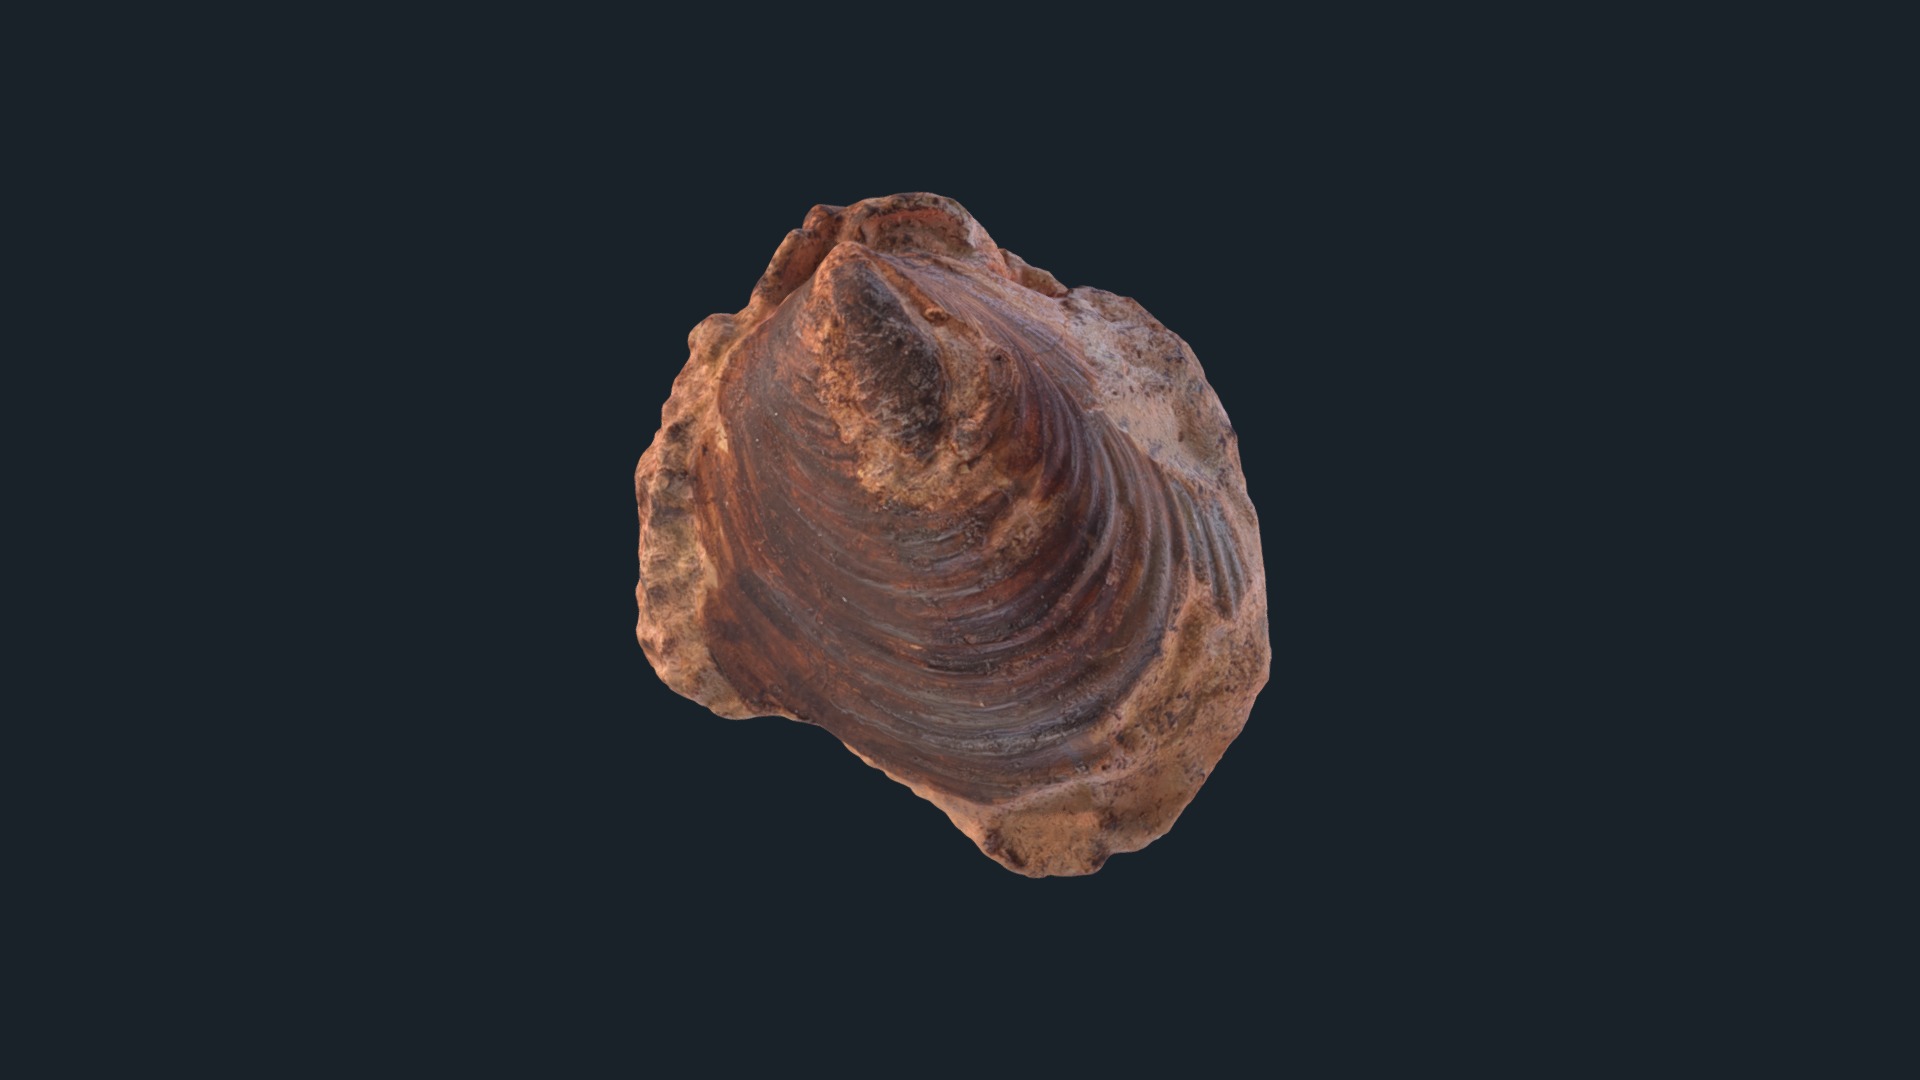 3D model Inoceramus anglicus (replica) - This is a 3D model of the Inoceramus anglicus (replica). The 3D model is about a close-up of a walnut.